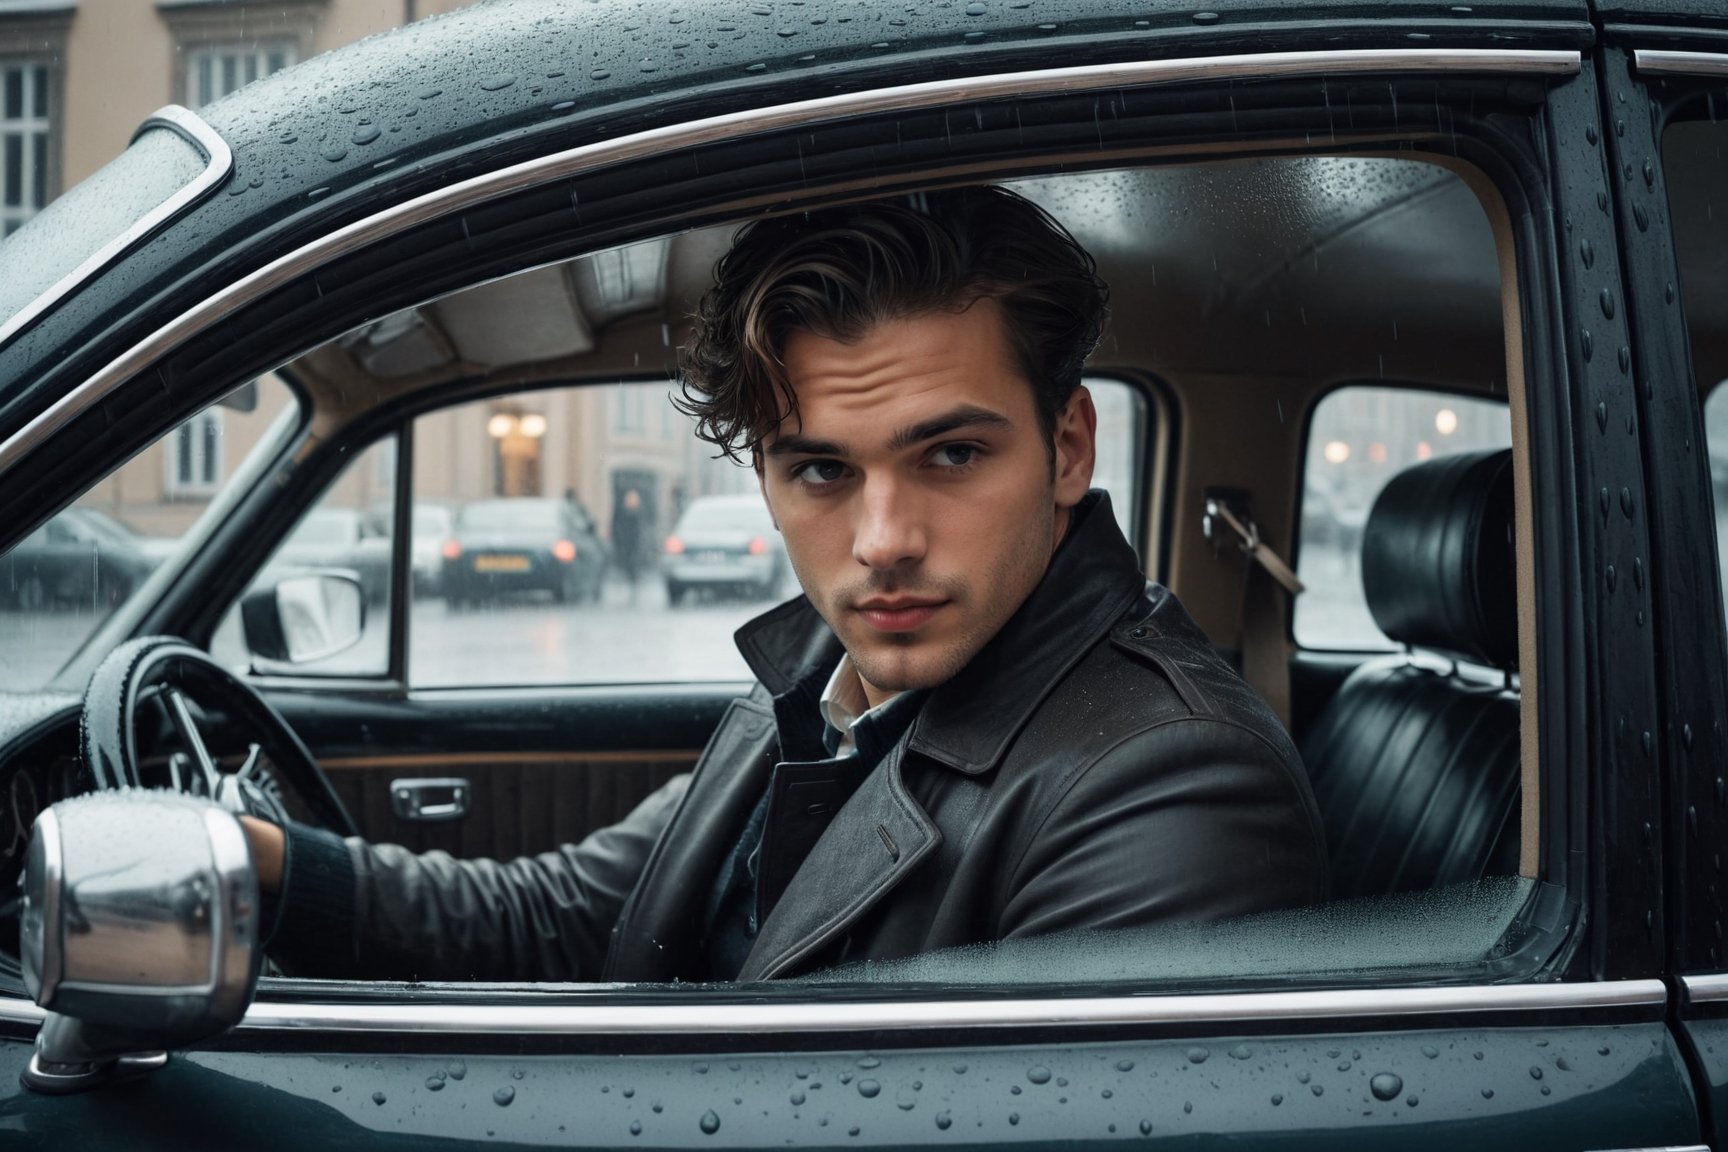 Generate an image of a young and handsome man waiting inside his car, his gaze fixed on a typical Berlin street corner as he anticipates the arrival of a comrade. Capture the scene from inside the car, providing a view through the window. Incorporate the atmospheric element of rain to enhance the mood. Pay attention to details such as the architecture of the Berlin street and the historical context of the setting. Emphasize the anticipation and camaraderie in the air, creating a visual narrative that reflects the historical and emotional elements of the Weimar Republic era. sdxl